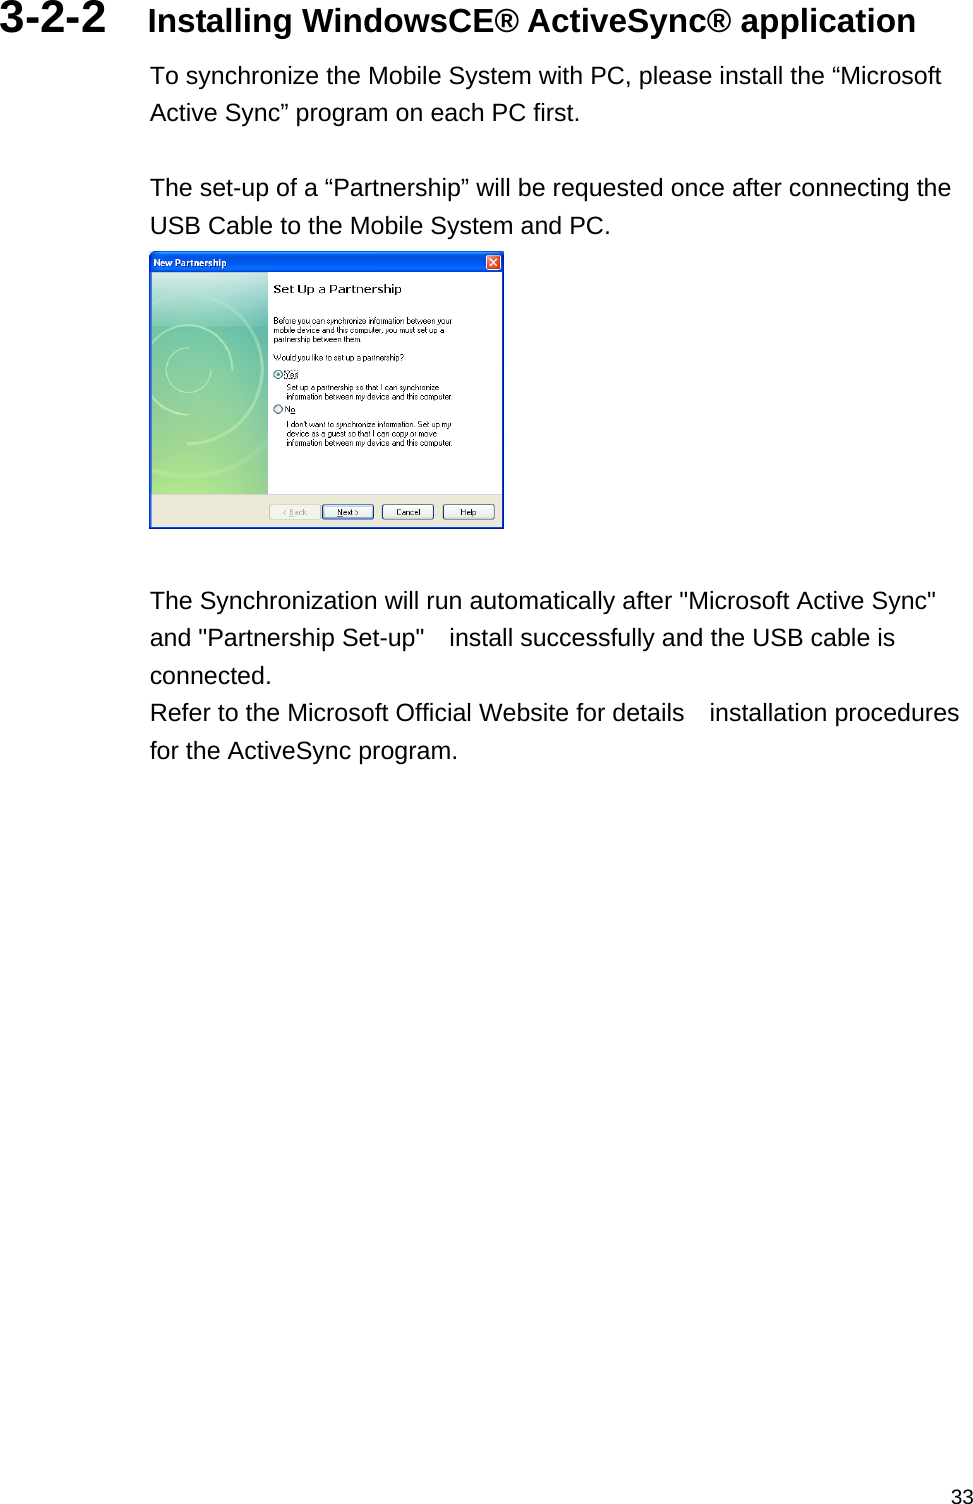   333-2-2  Installing WindowsCE® ActiveSync® application To synchronize the Mobile System with PC, please install the “Microsoft Active Sync” program on each PC first.  The set-up of a “Partnership” will be requested once after connecting the USB Cable to the Mobile System and PC.   The Synchronization will run automatically after &quot;Microsoft Active Sync&quot; and &quot;Partnership Set-up&quot;    install successfully and the USB cable is connected. Refer to the Microsoft Official Website for details    installation procedures for the ActiveSync program.  